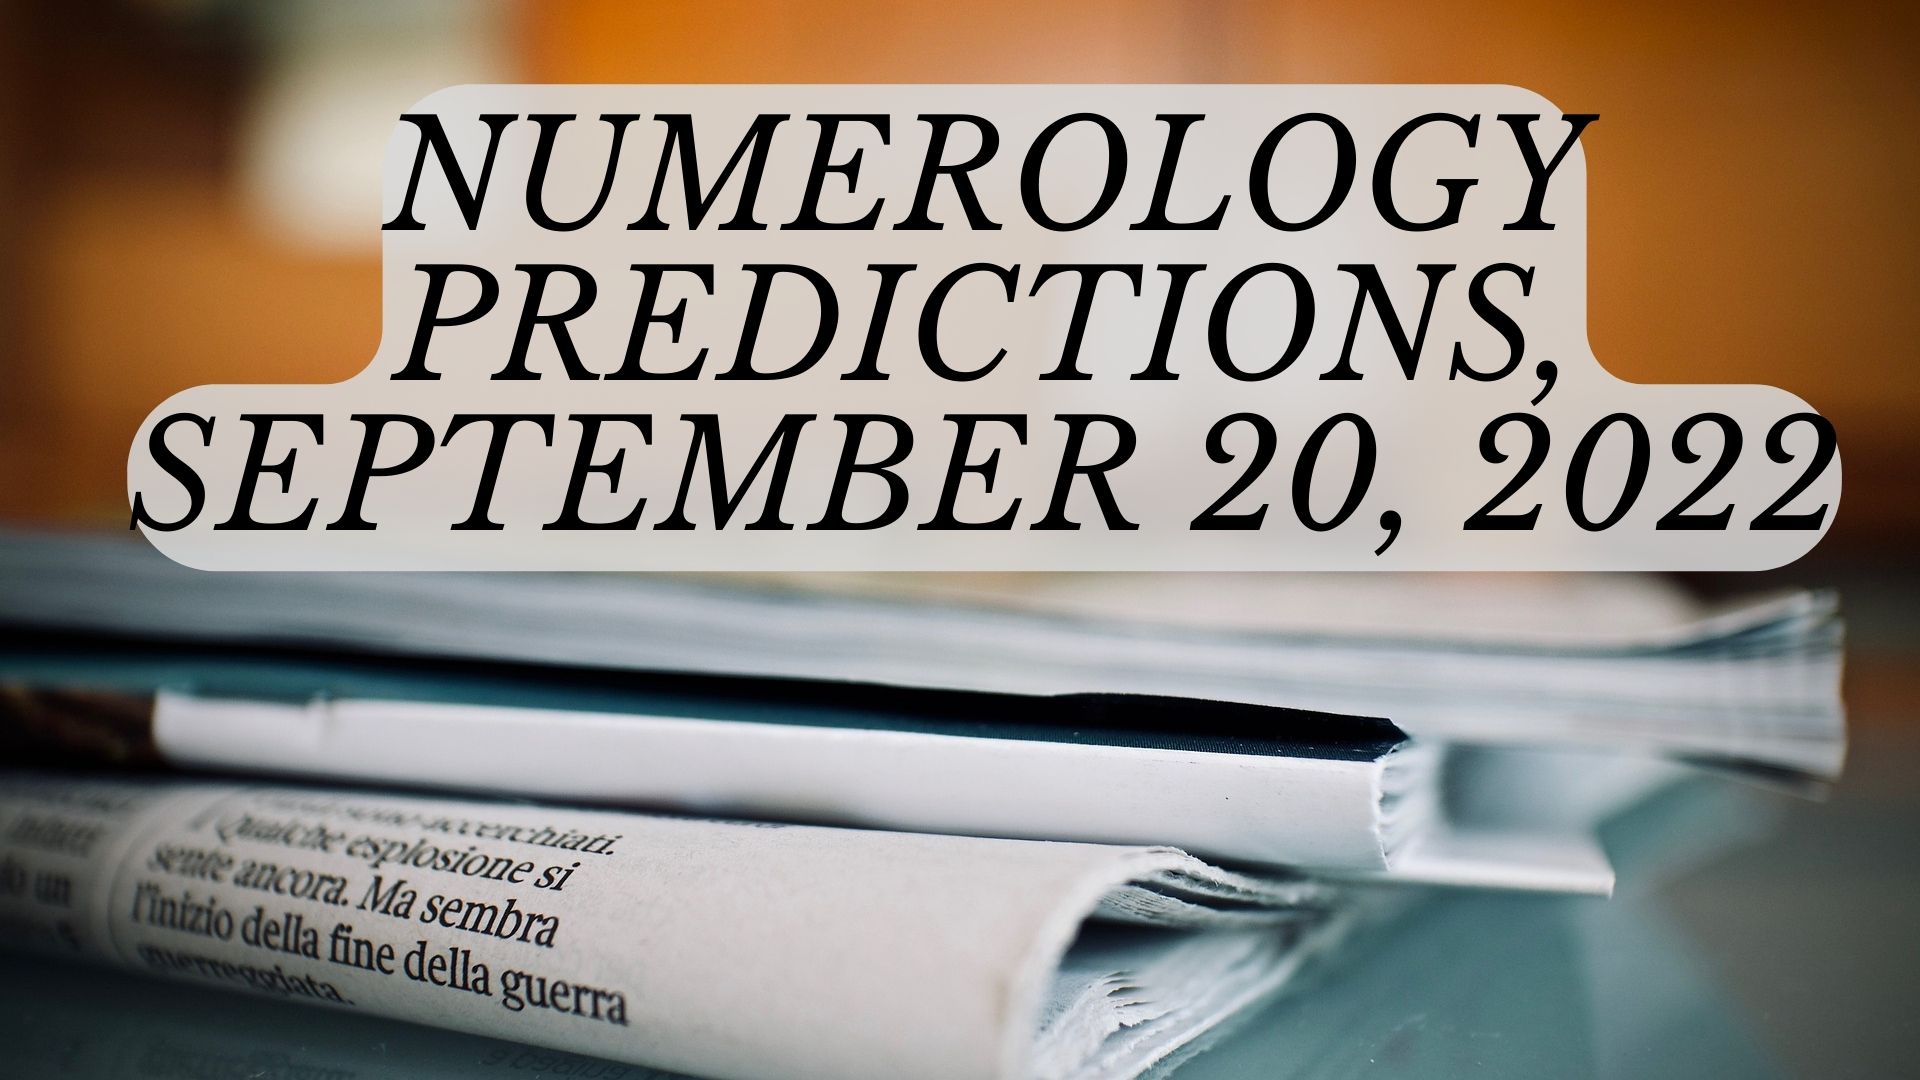 Numerology Predictions, September 20, 2022 - Check Out Your Lucky Numbers And Other Details